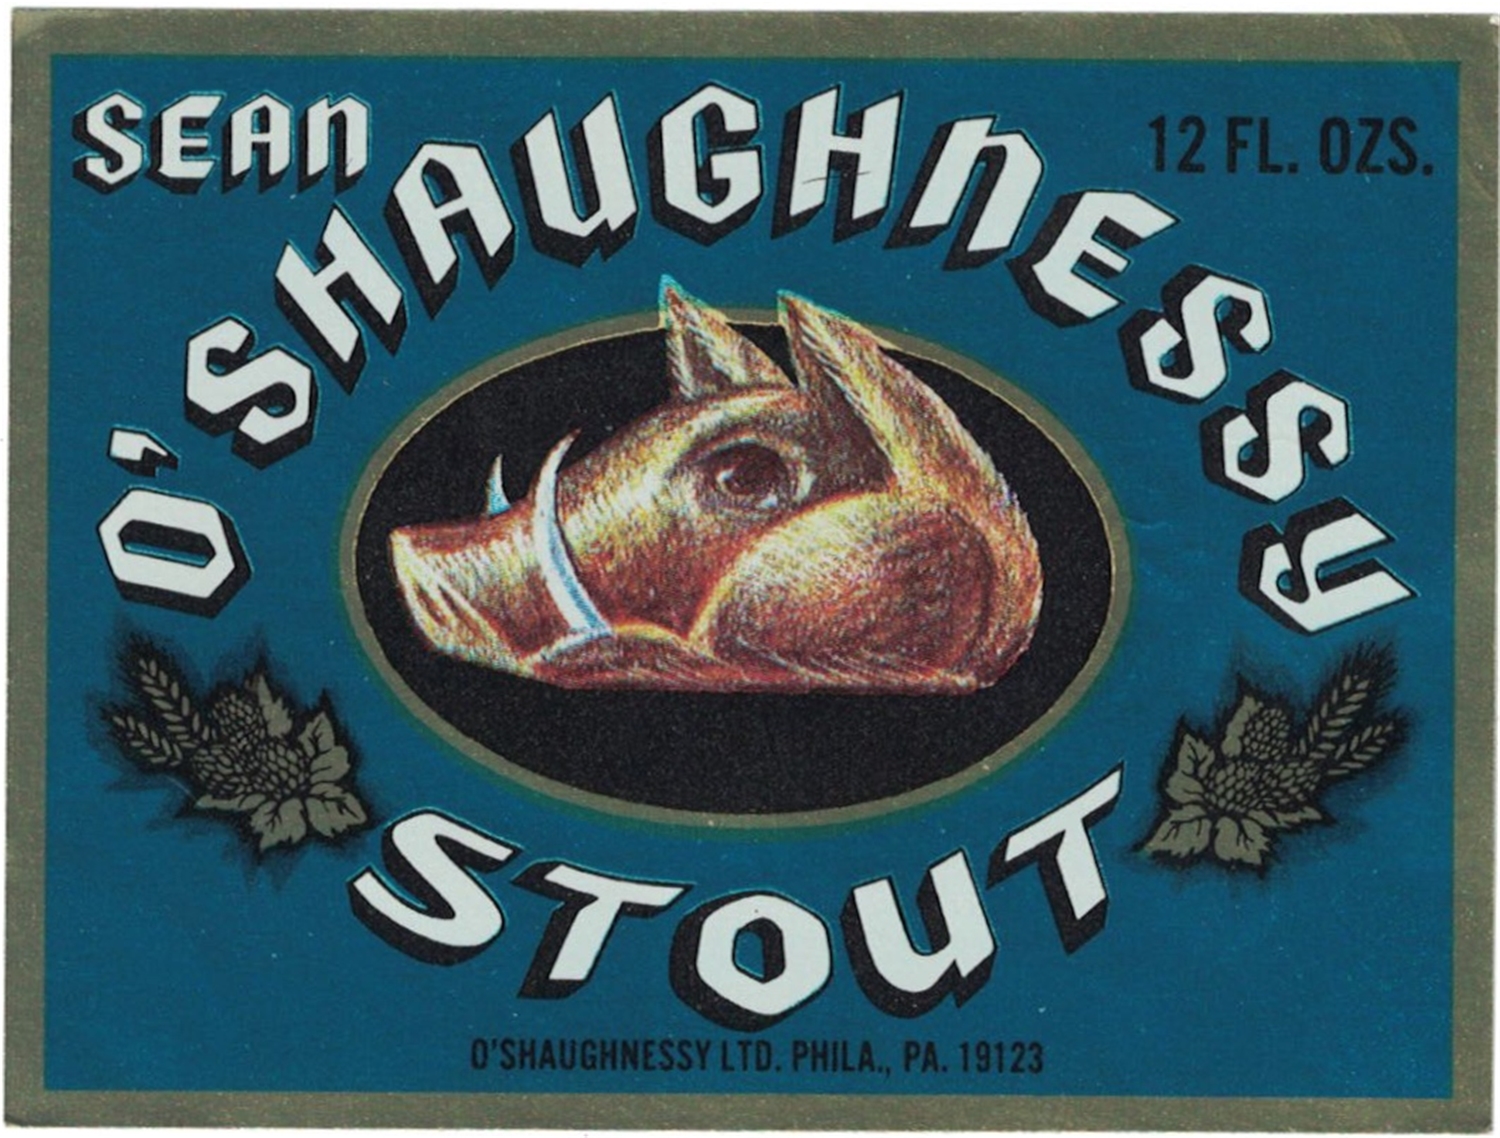 O'Shaughnessy Stout Beer Label 